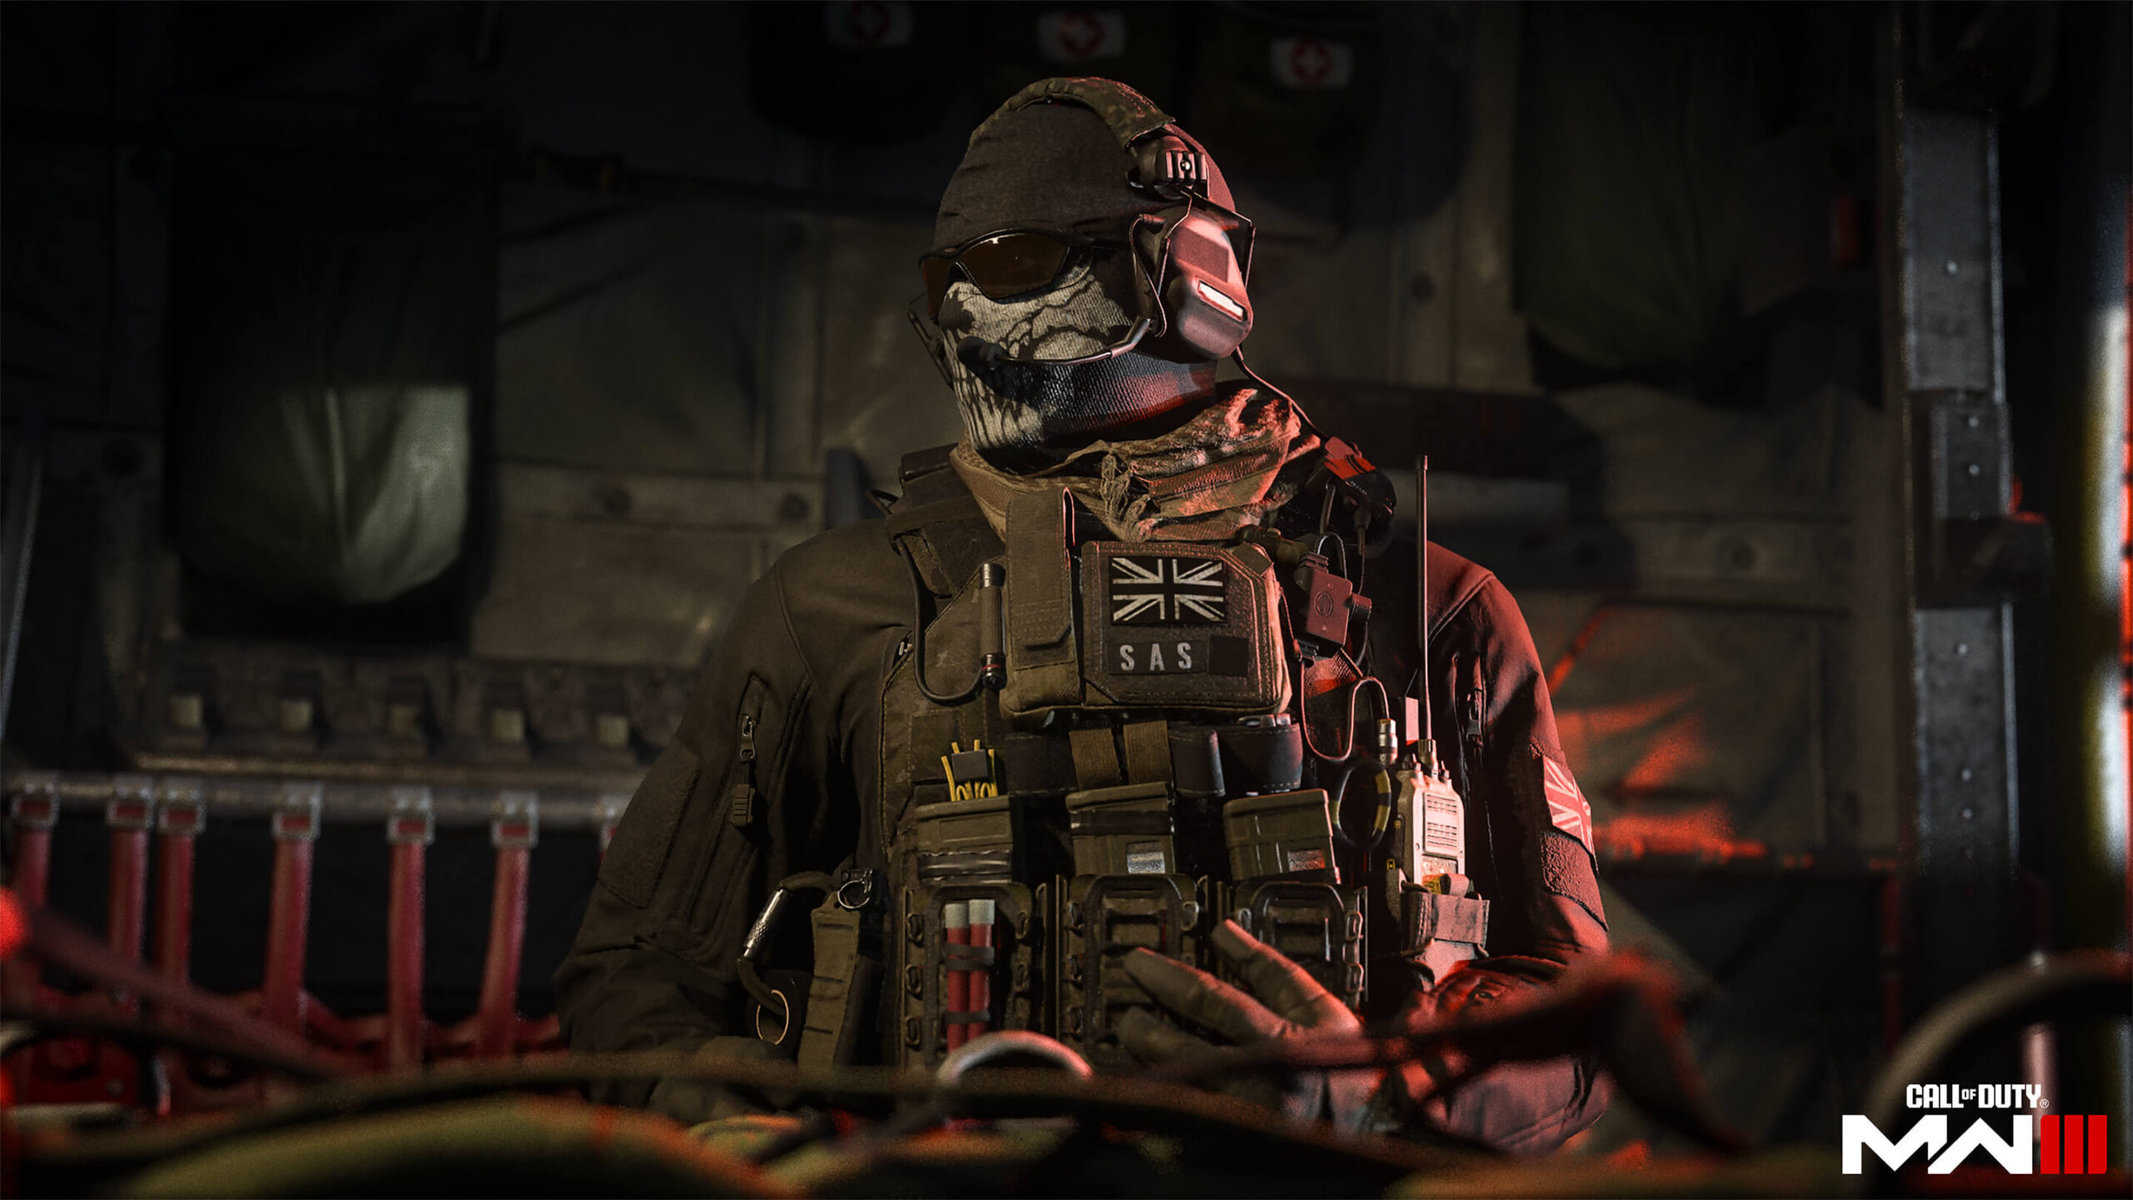 Microsoft Reveals Sony's Activision Deal Is Blocking 'Call Of Duty